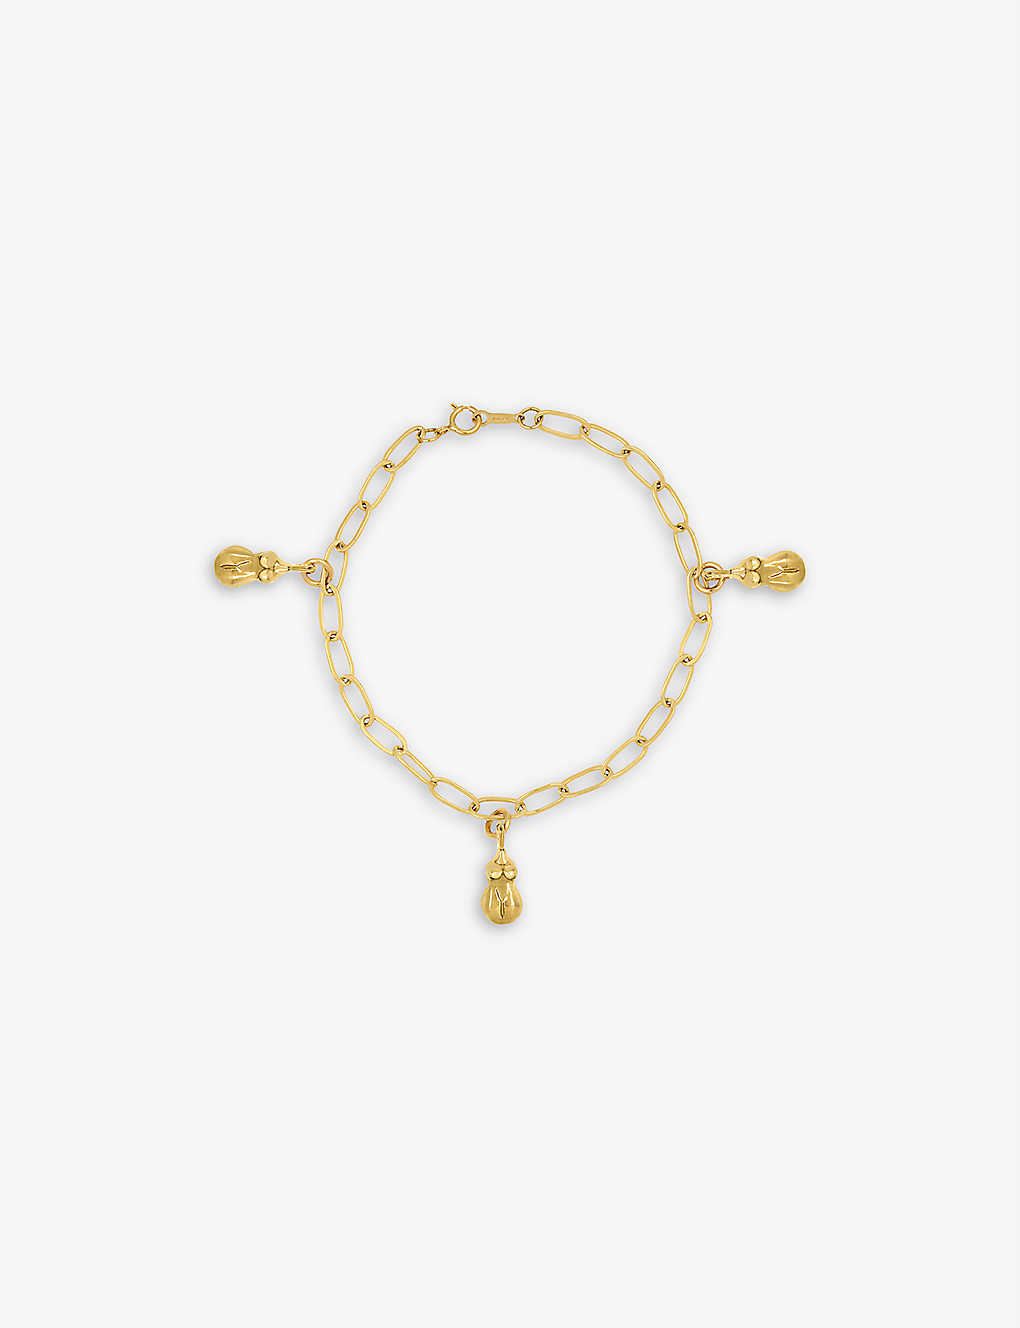 La Maison Couture Deborah Blythe Wobbly Bits 18ct Yellow-gold Plated Recycled Brass Charm Bracelet